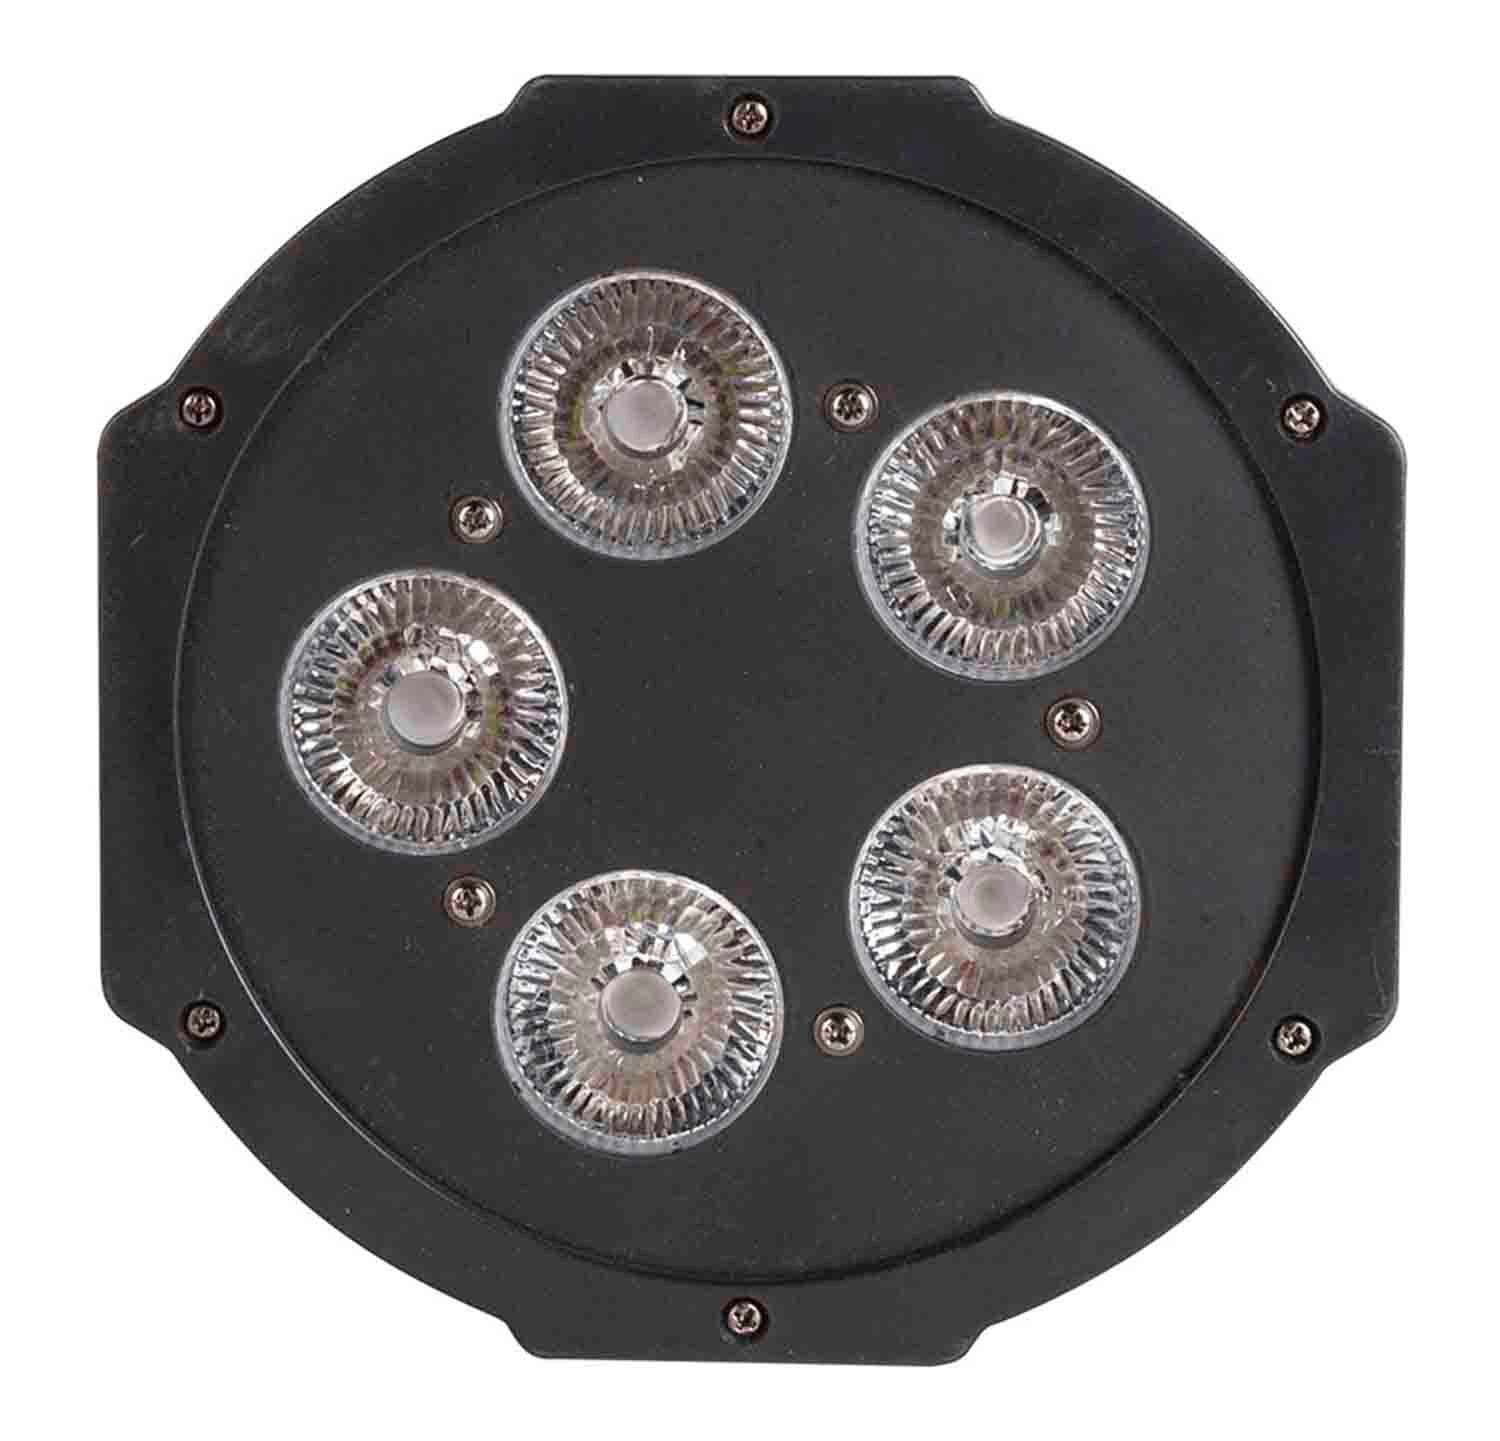 Colorkey CKU-2152 WaferPar HEX 5 MKII Low Profile Wash Light with High Output 6 in 1 Color (RGBAW-UV) LEDs - Hollywood DJ